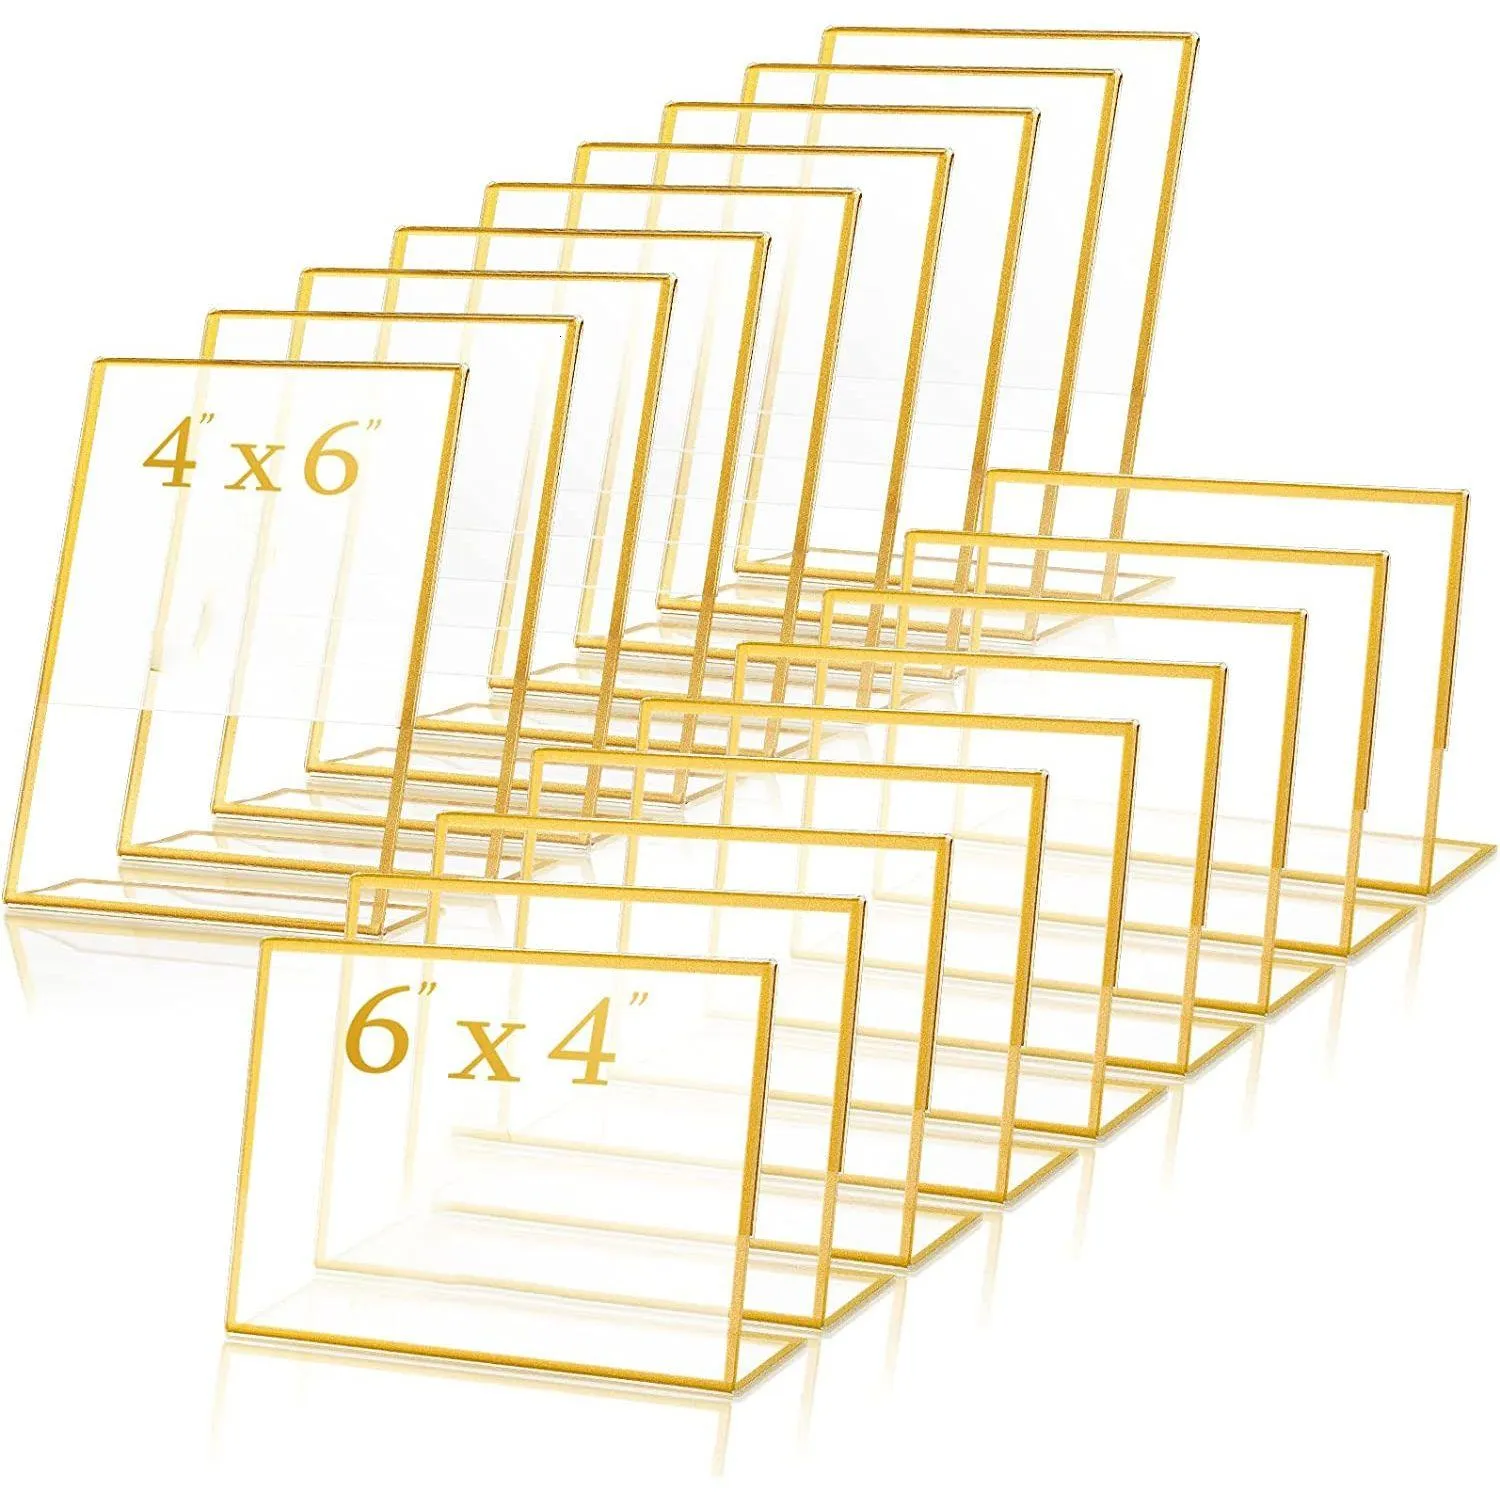 Other Event Party Supplies Gold Frame Acrylic Wedding Table Number Tilted Transparent Menu Image Doublesided Booth Office Display Dhnze